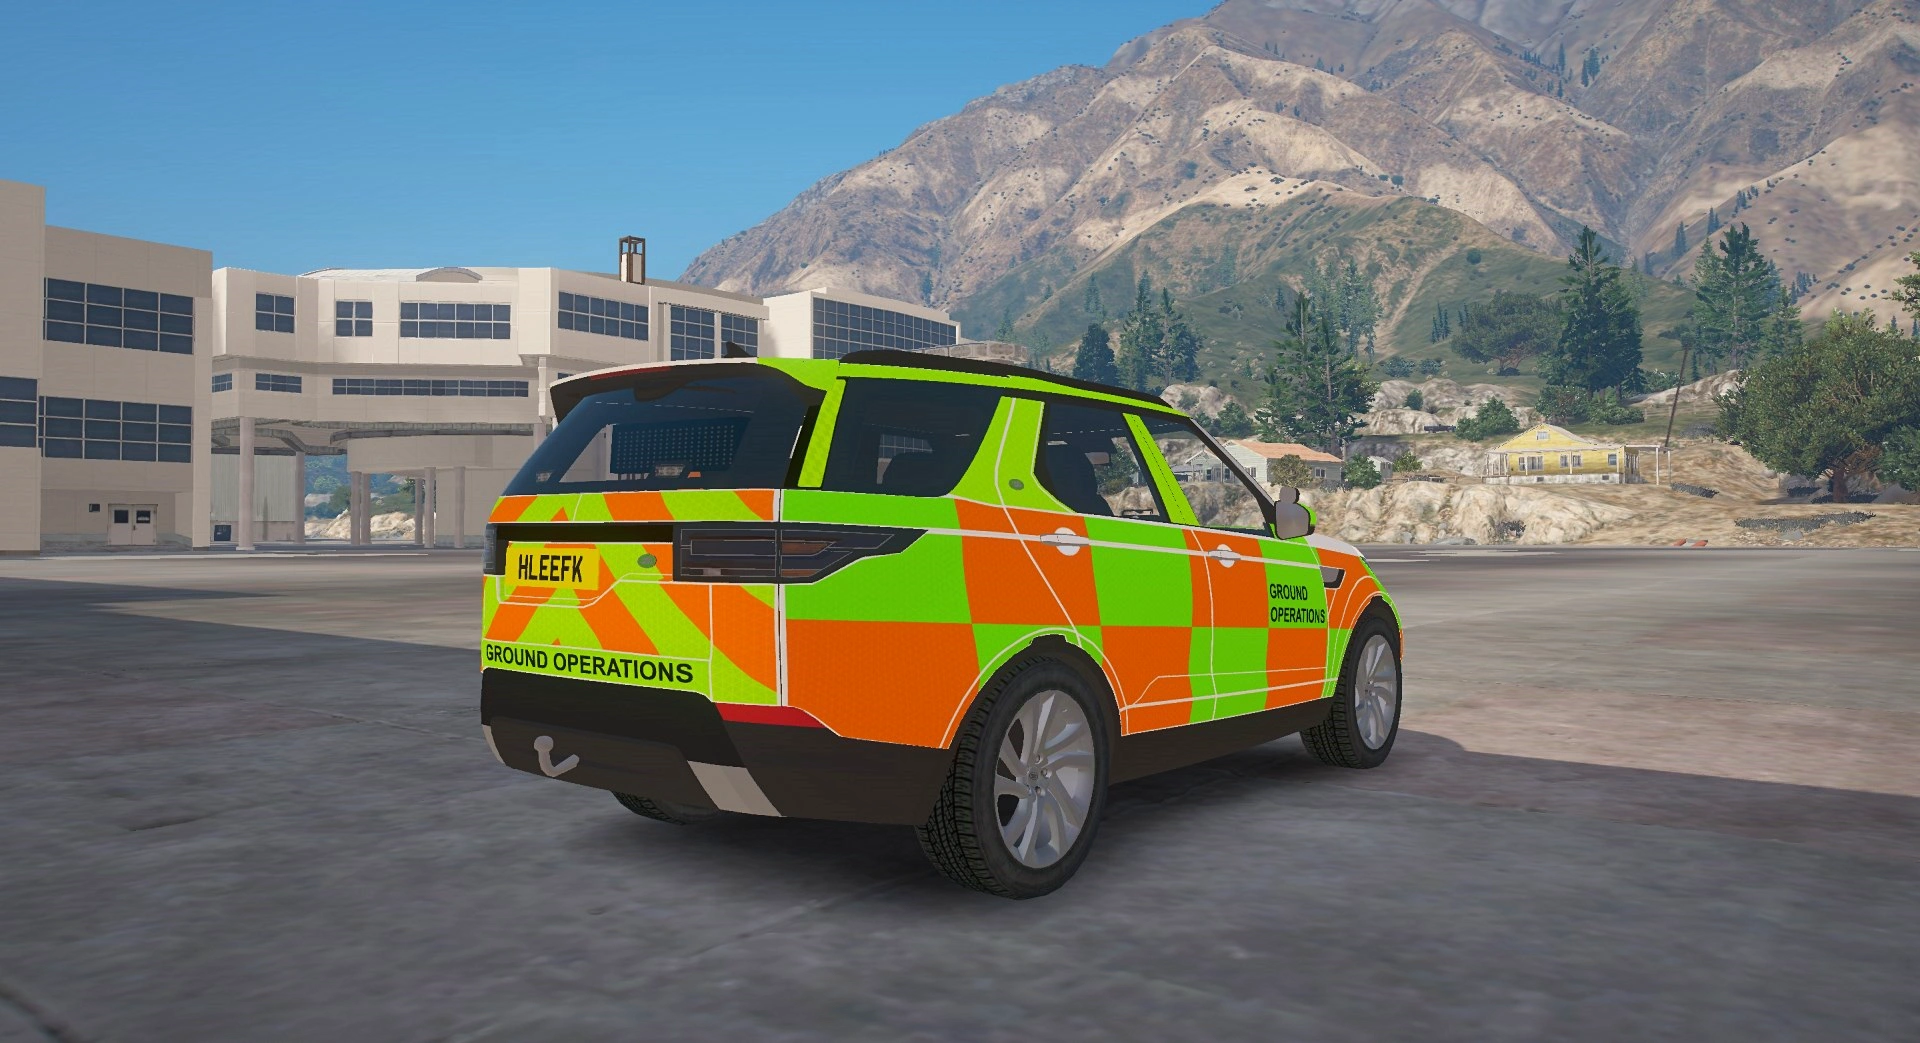 Ground Crew Operations Car - Land Rover Discovery 5-IMAGE